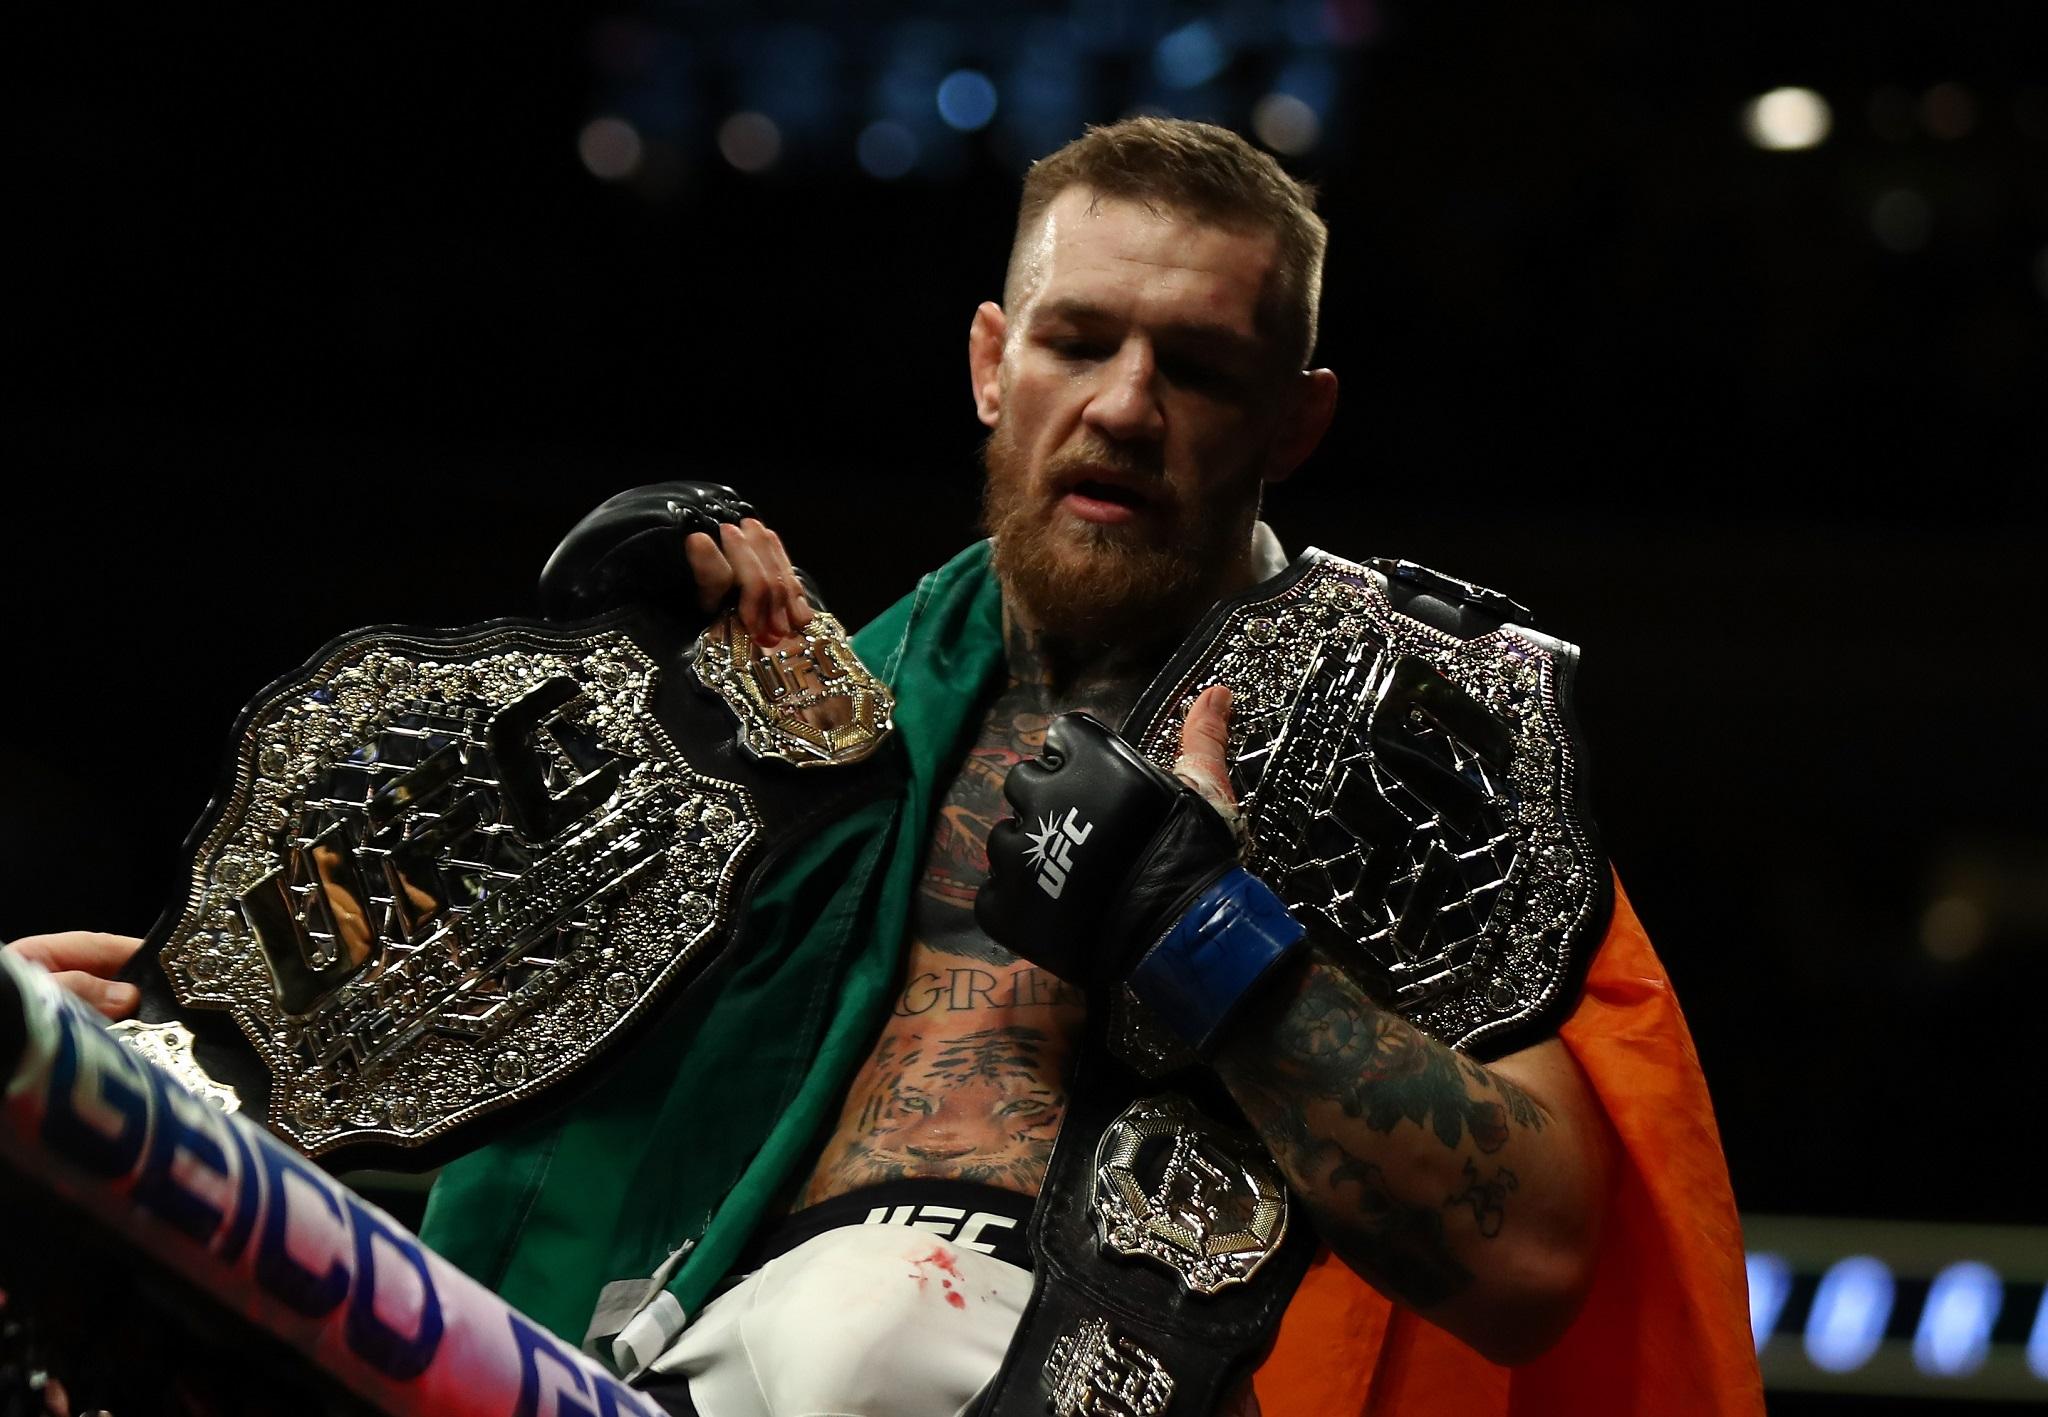 &#13;
McGregor beat Eddie Alvarez at UFC 205 to hold the lightweight and featherweight titles &#13;